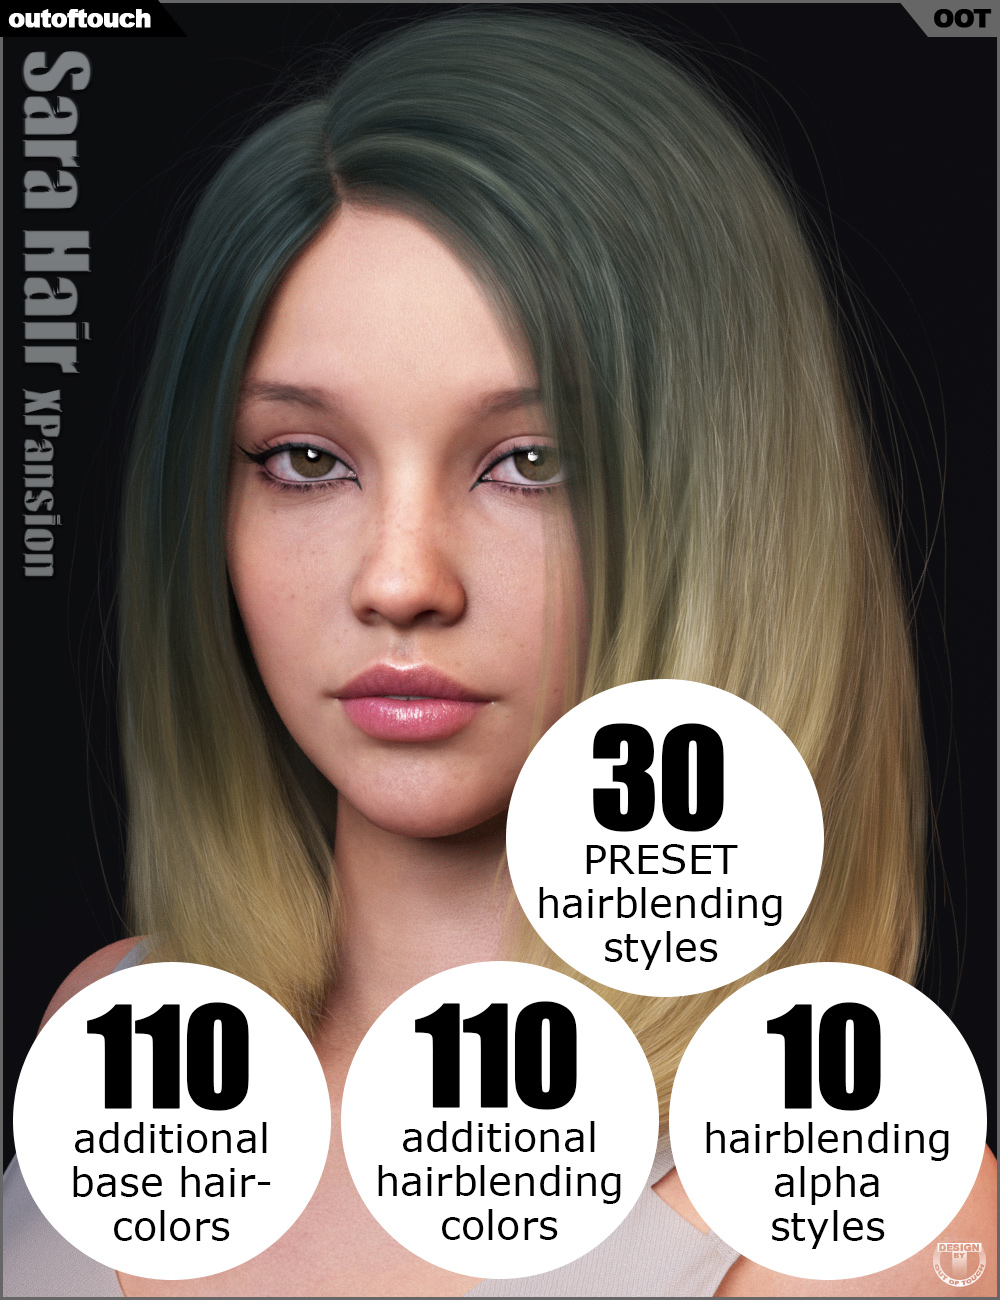 OOT Hairblending 2.0 Texture XPansion for Sara Hair by: outoftouch, 3D Models by Daz 3D